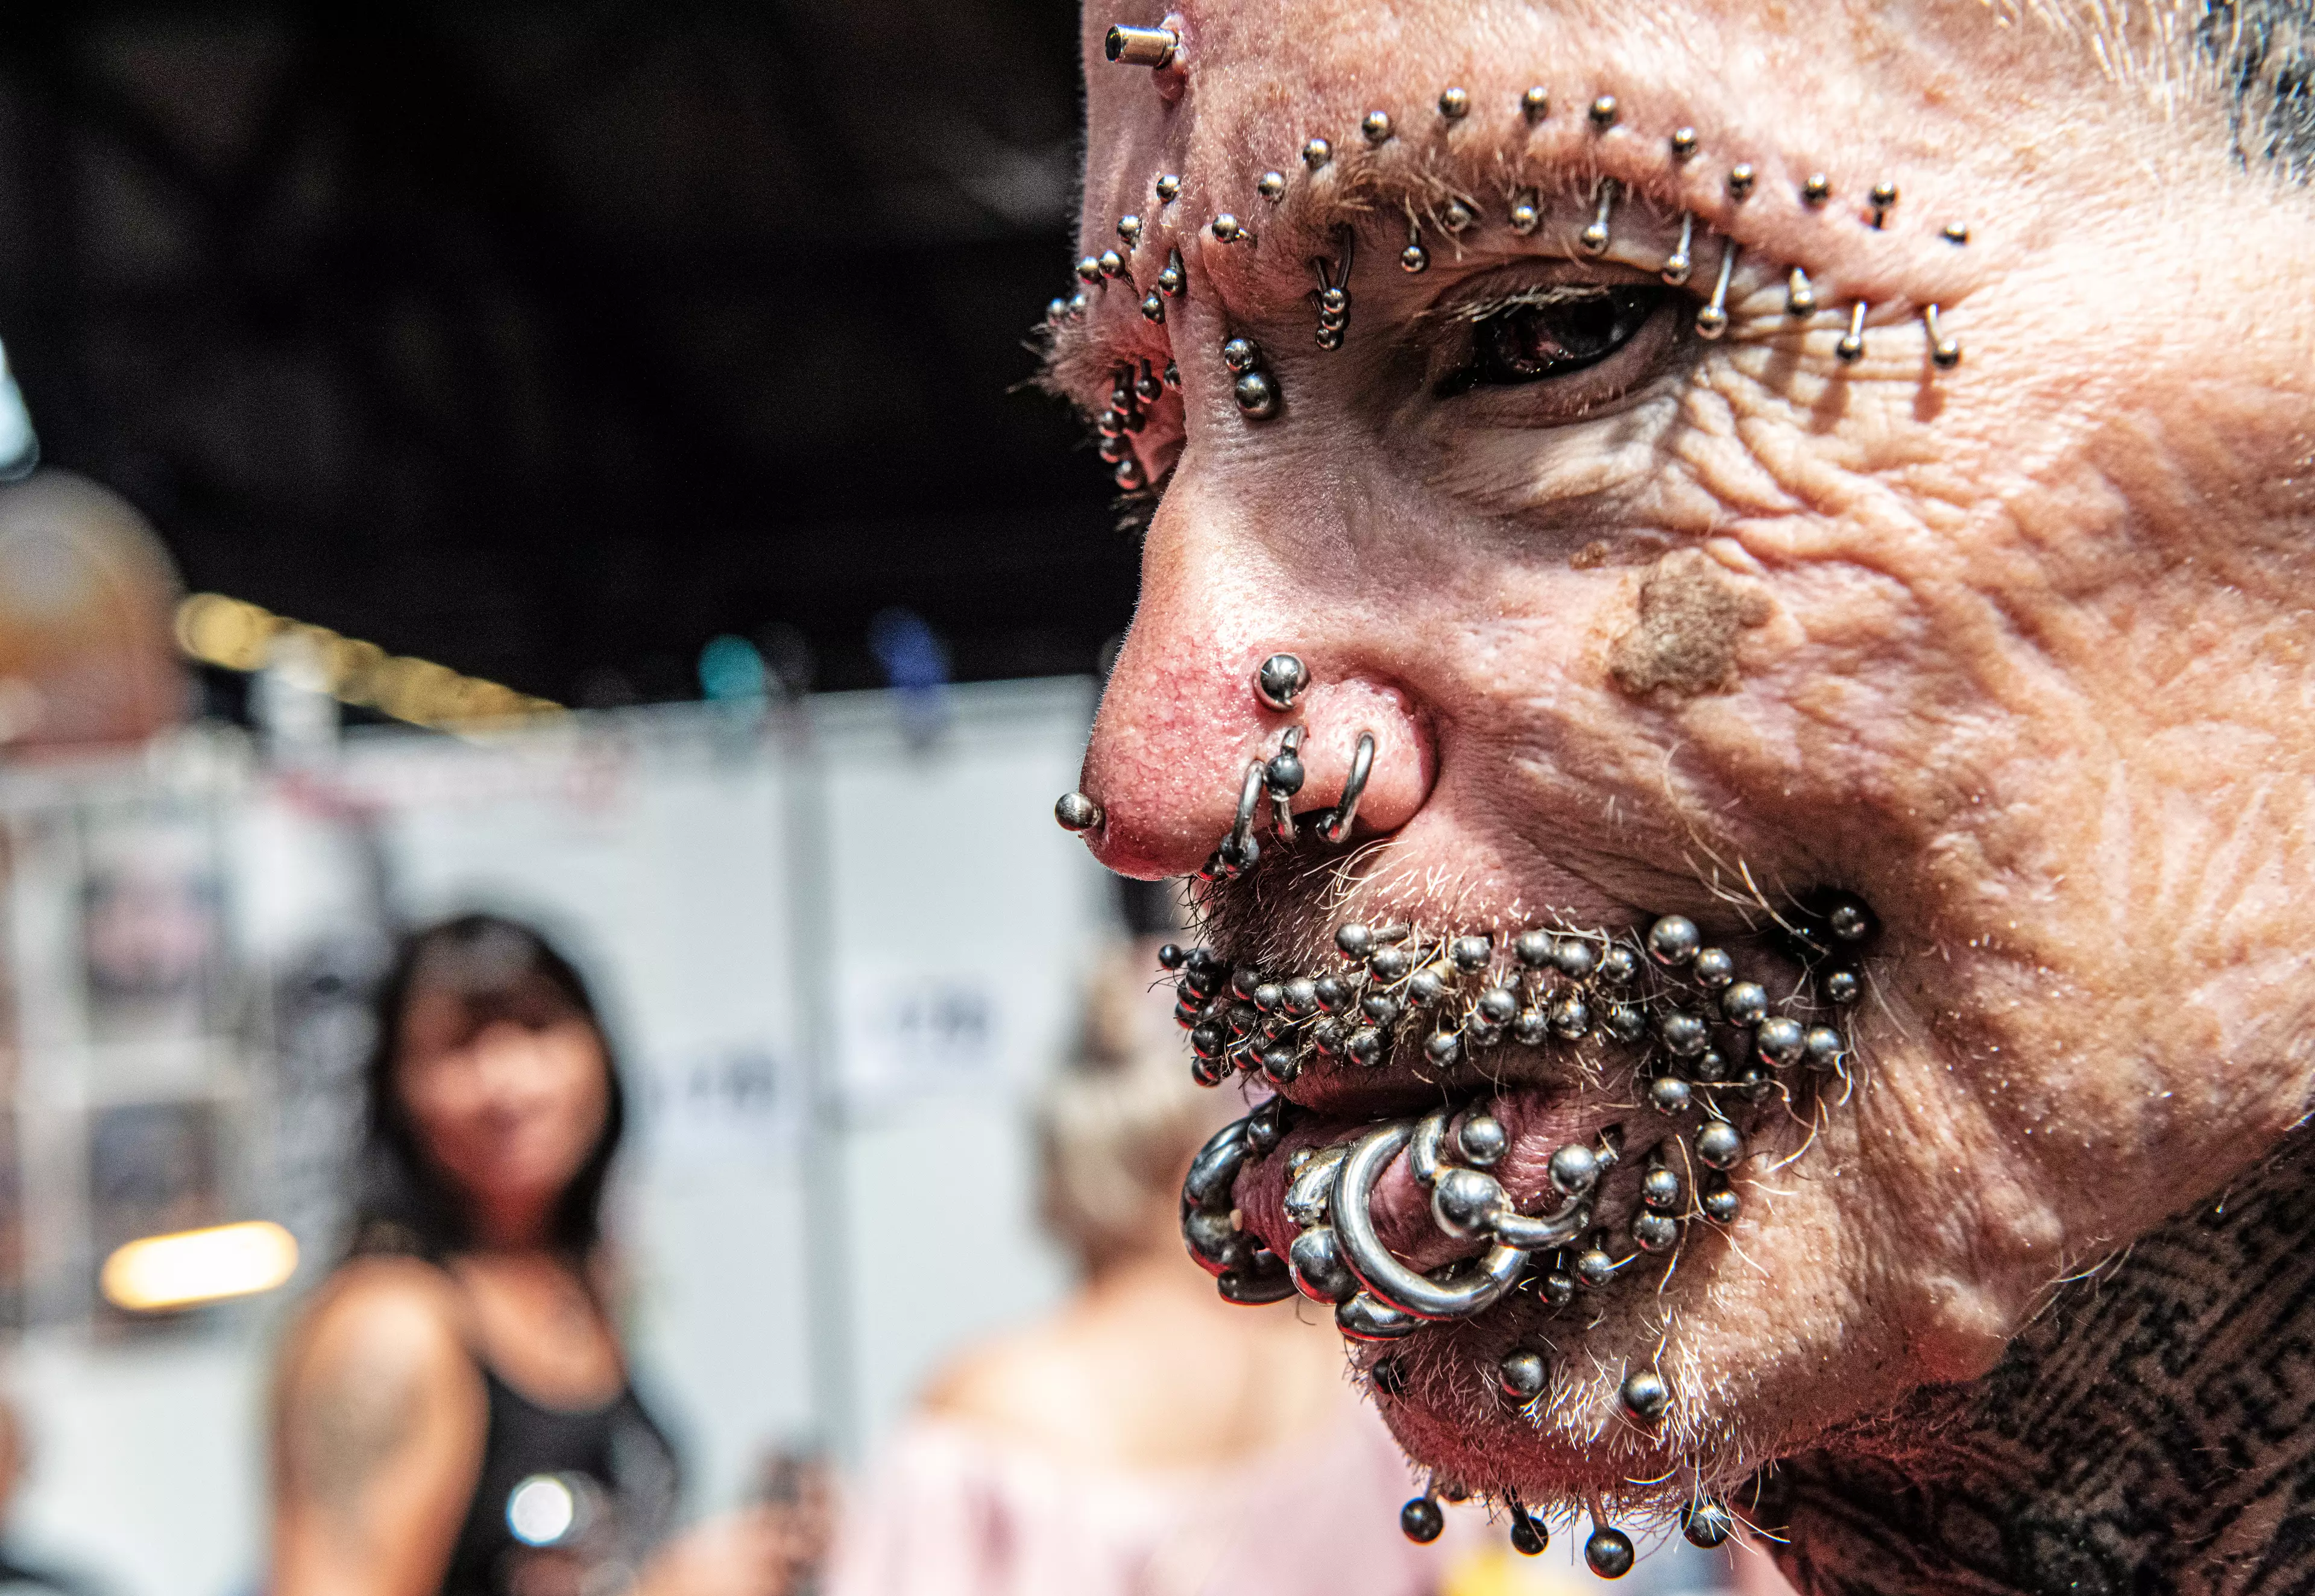 Rolf Buchholz has the world record for most pierced man, with more than 450 piercings.